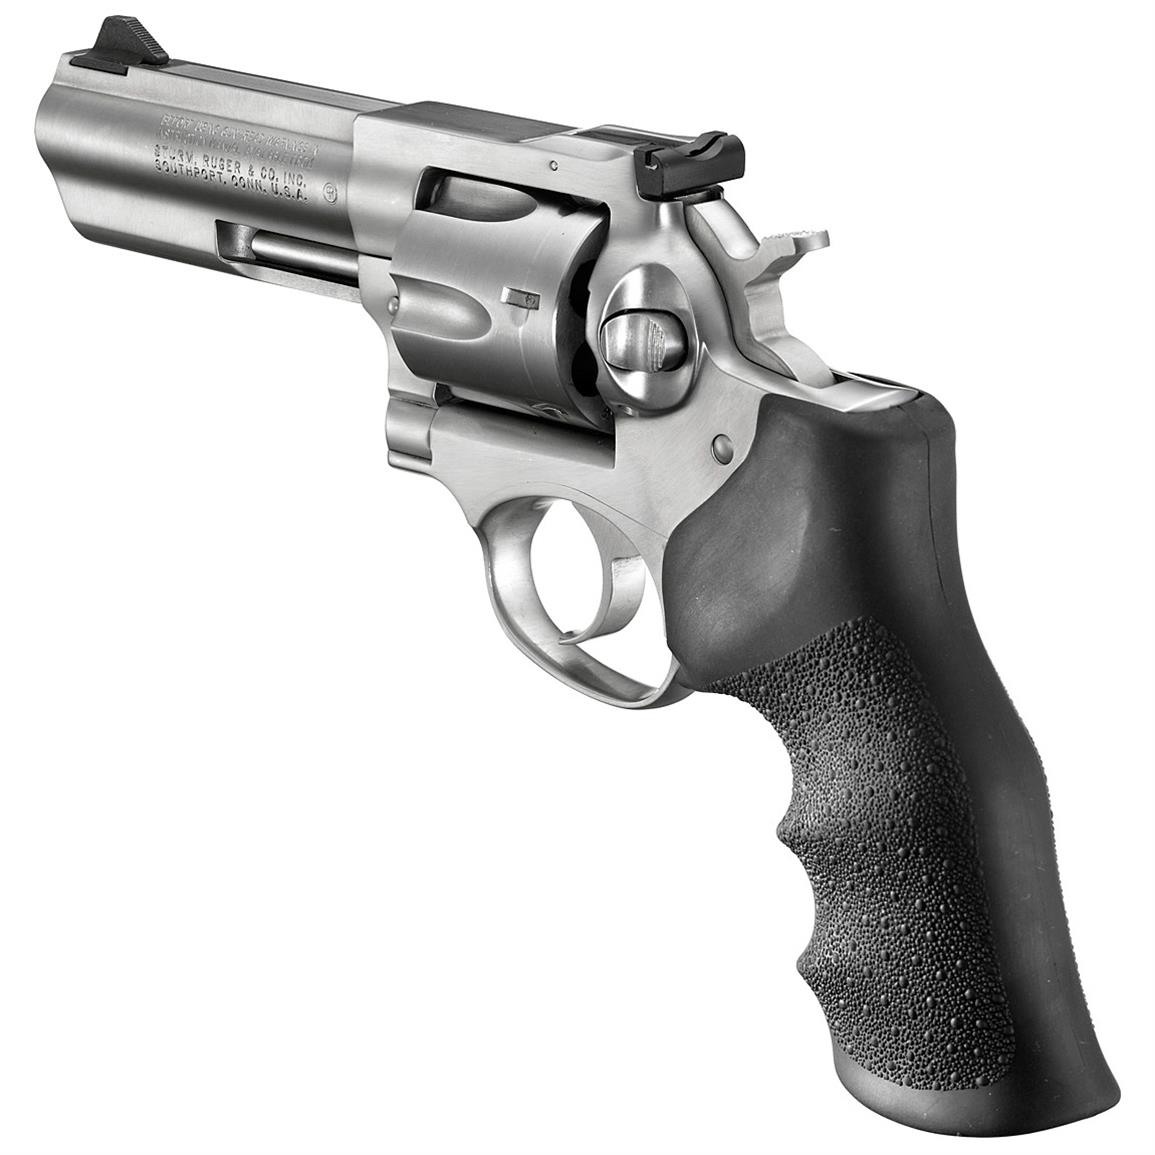 1155x1155 > Ruger Revolver Wallpapers